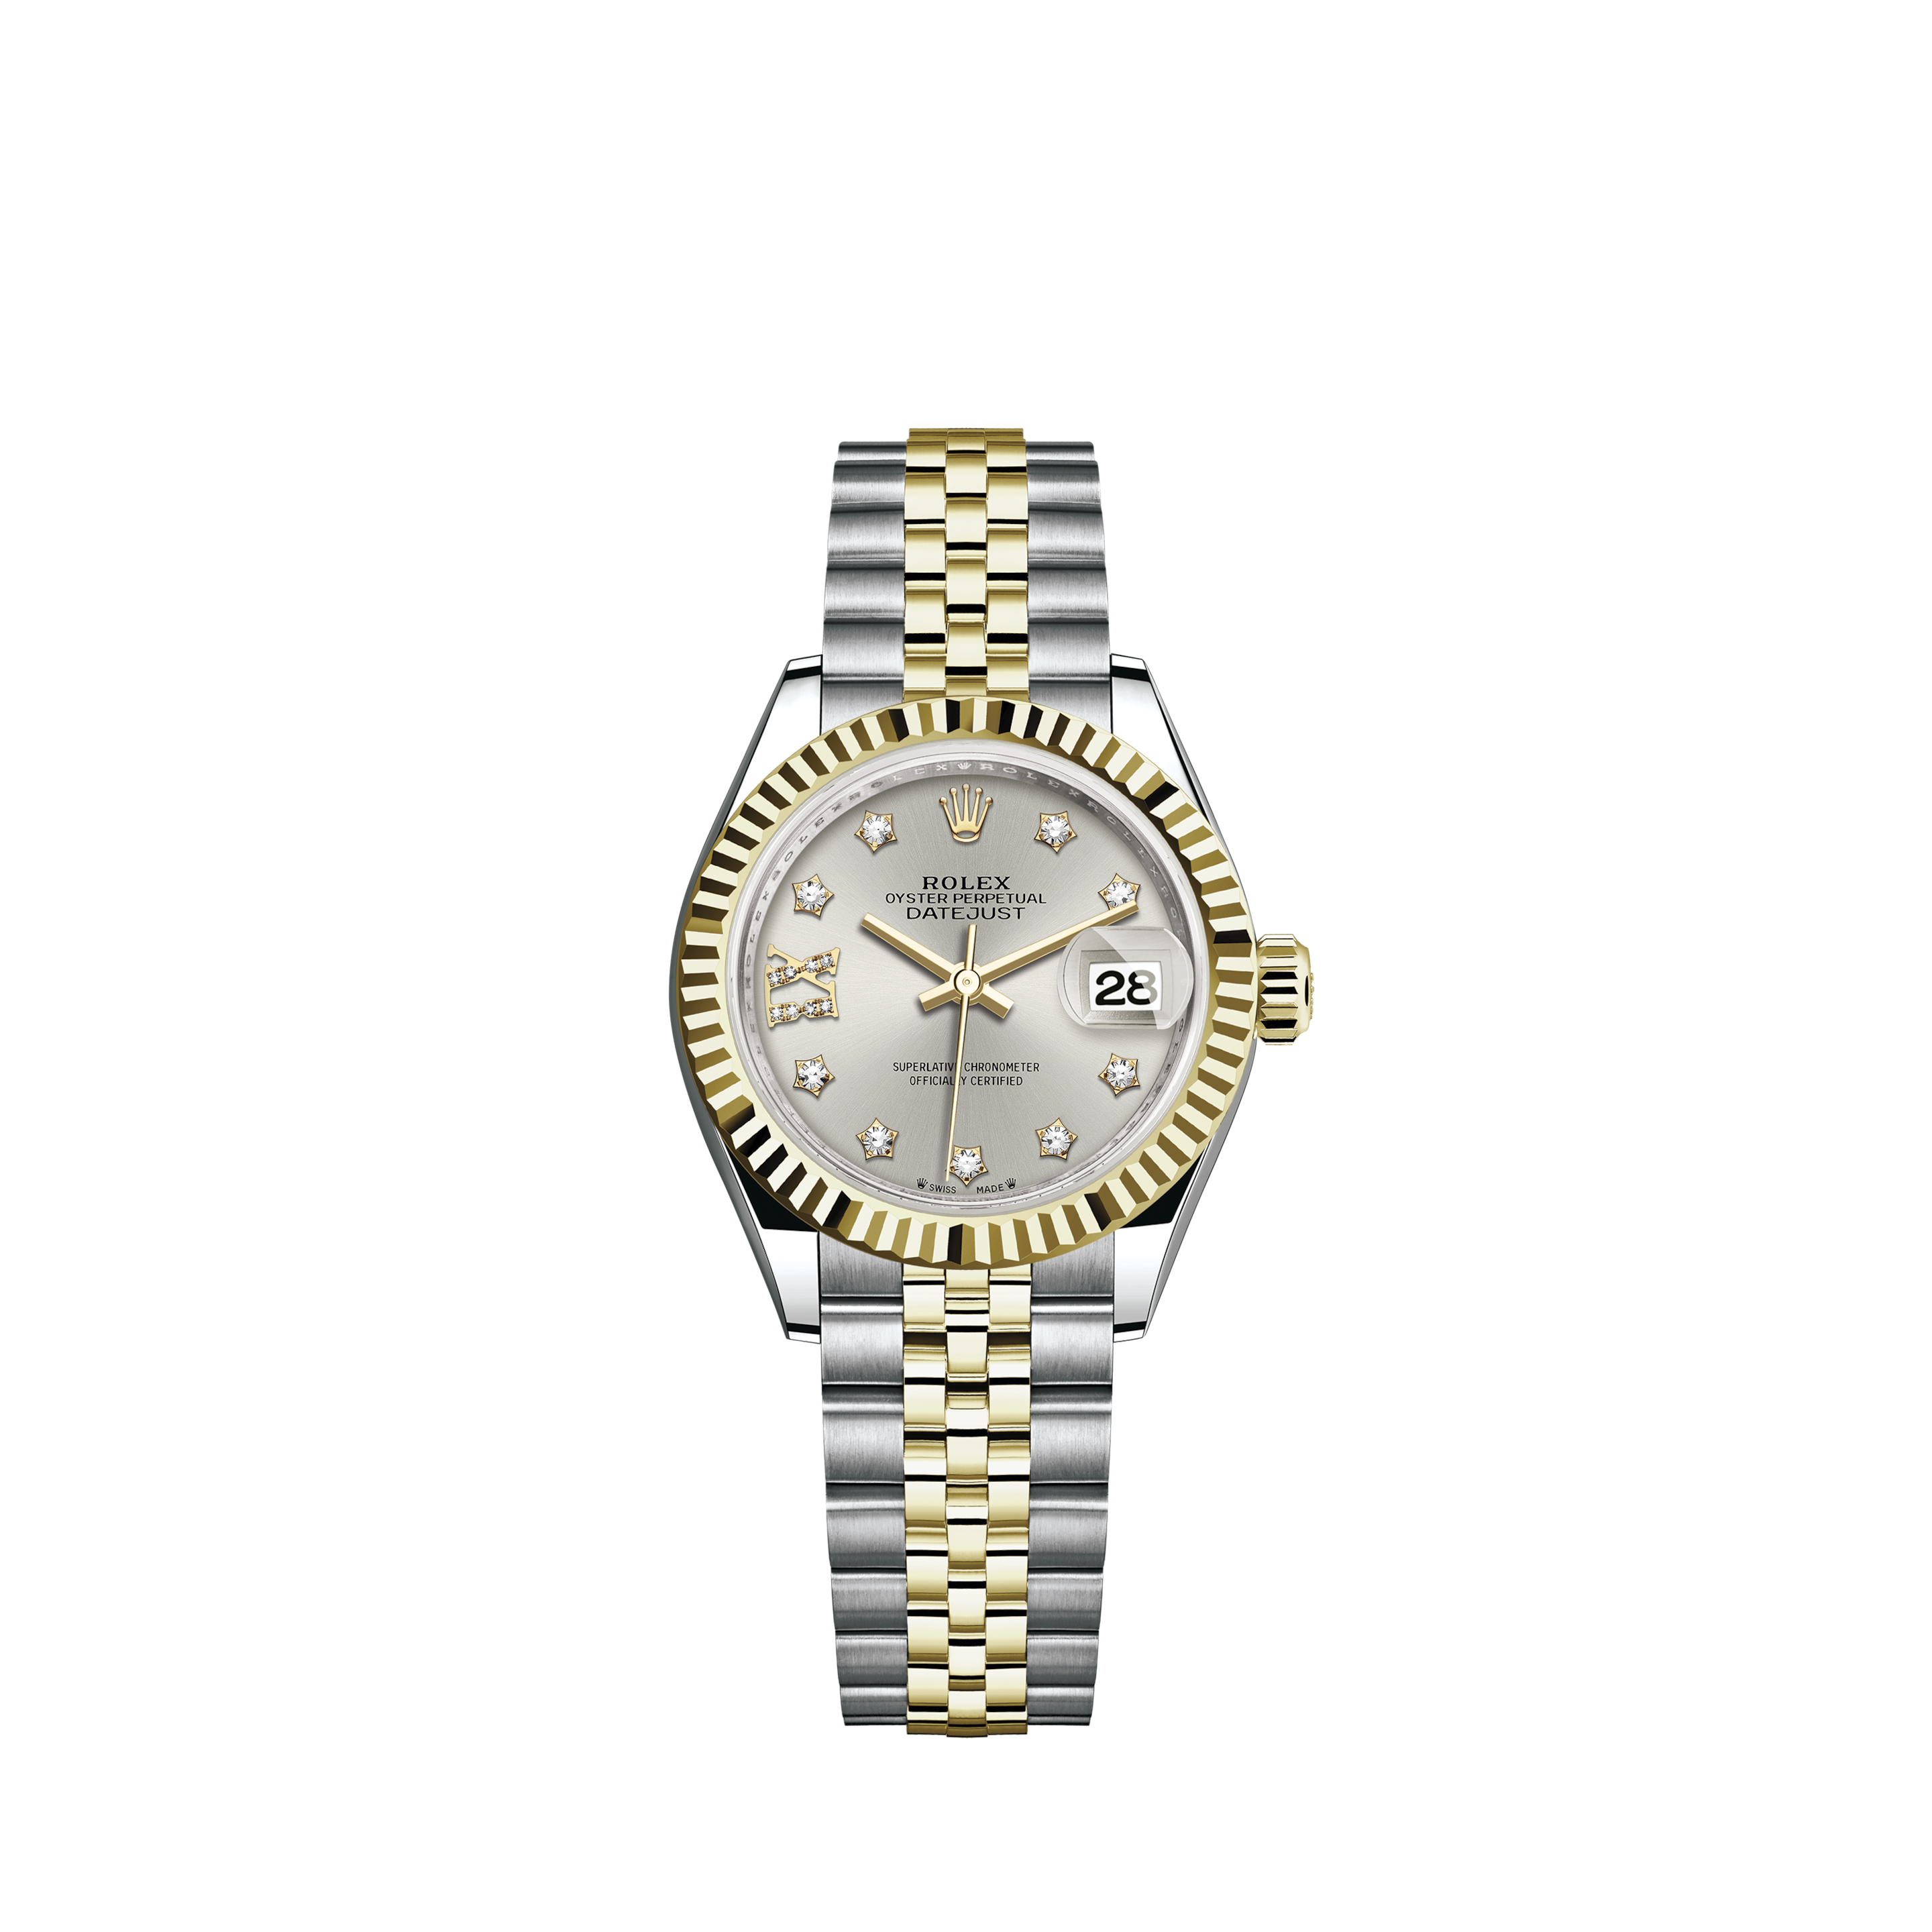 Rolex Datejust Turn-O-Graph Steel / White Gold Men's Watch Oyster Perpetual 16250Rolex Datejust Turn-O-Graph Stahl / Weissgold Oyster Perpetual Ref. 16264